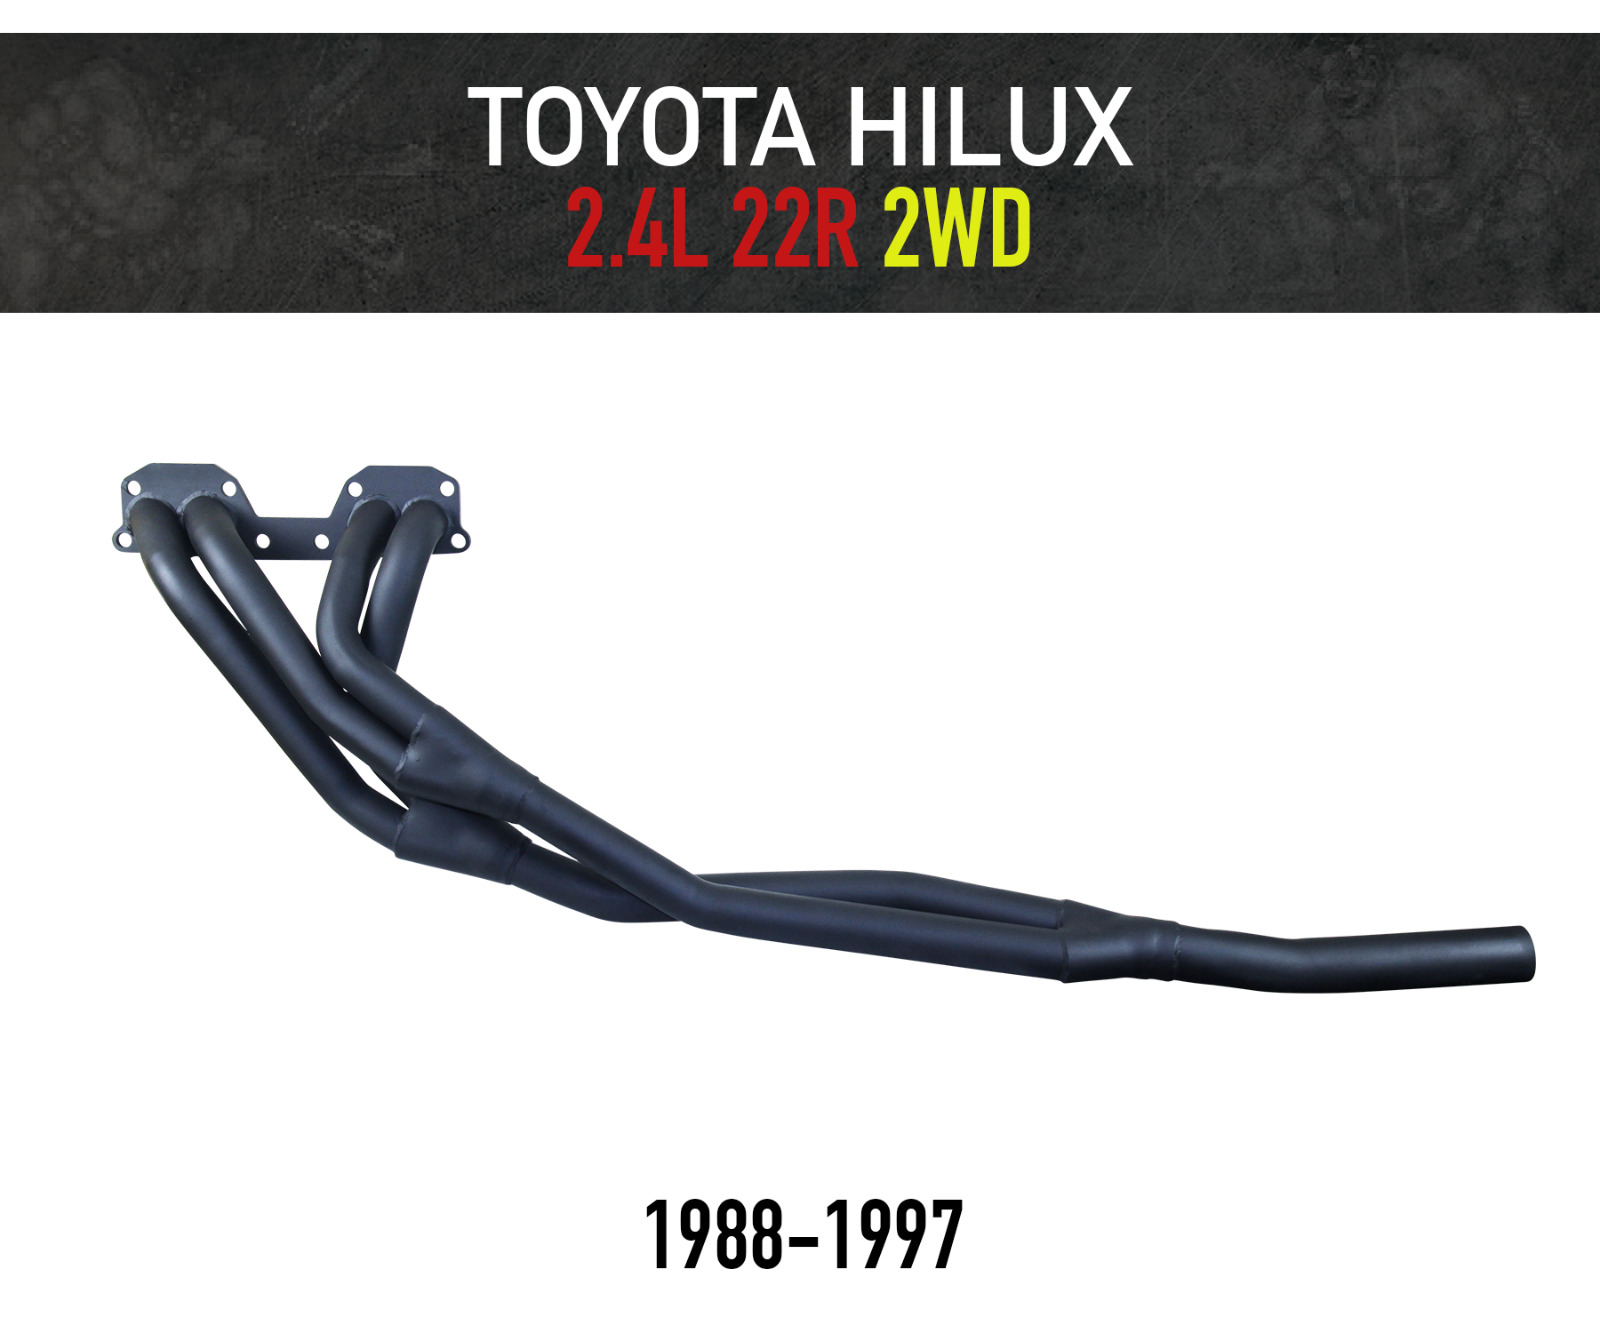 Headers / Extractors for Toyota Hilux 2.4L 22R (1988-1997) 2WD models